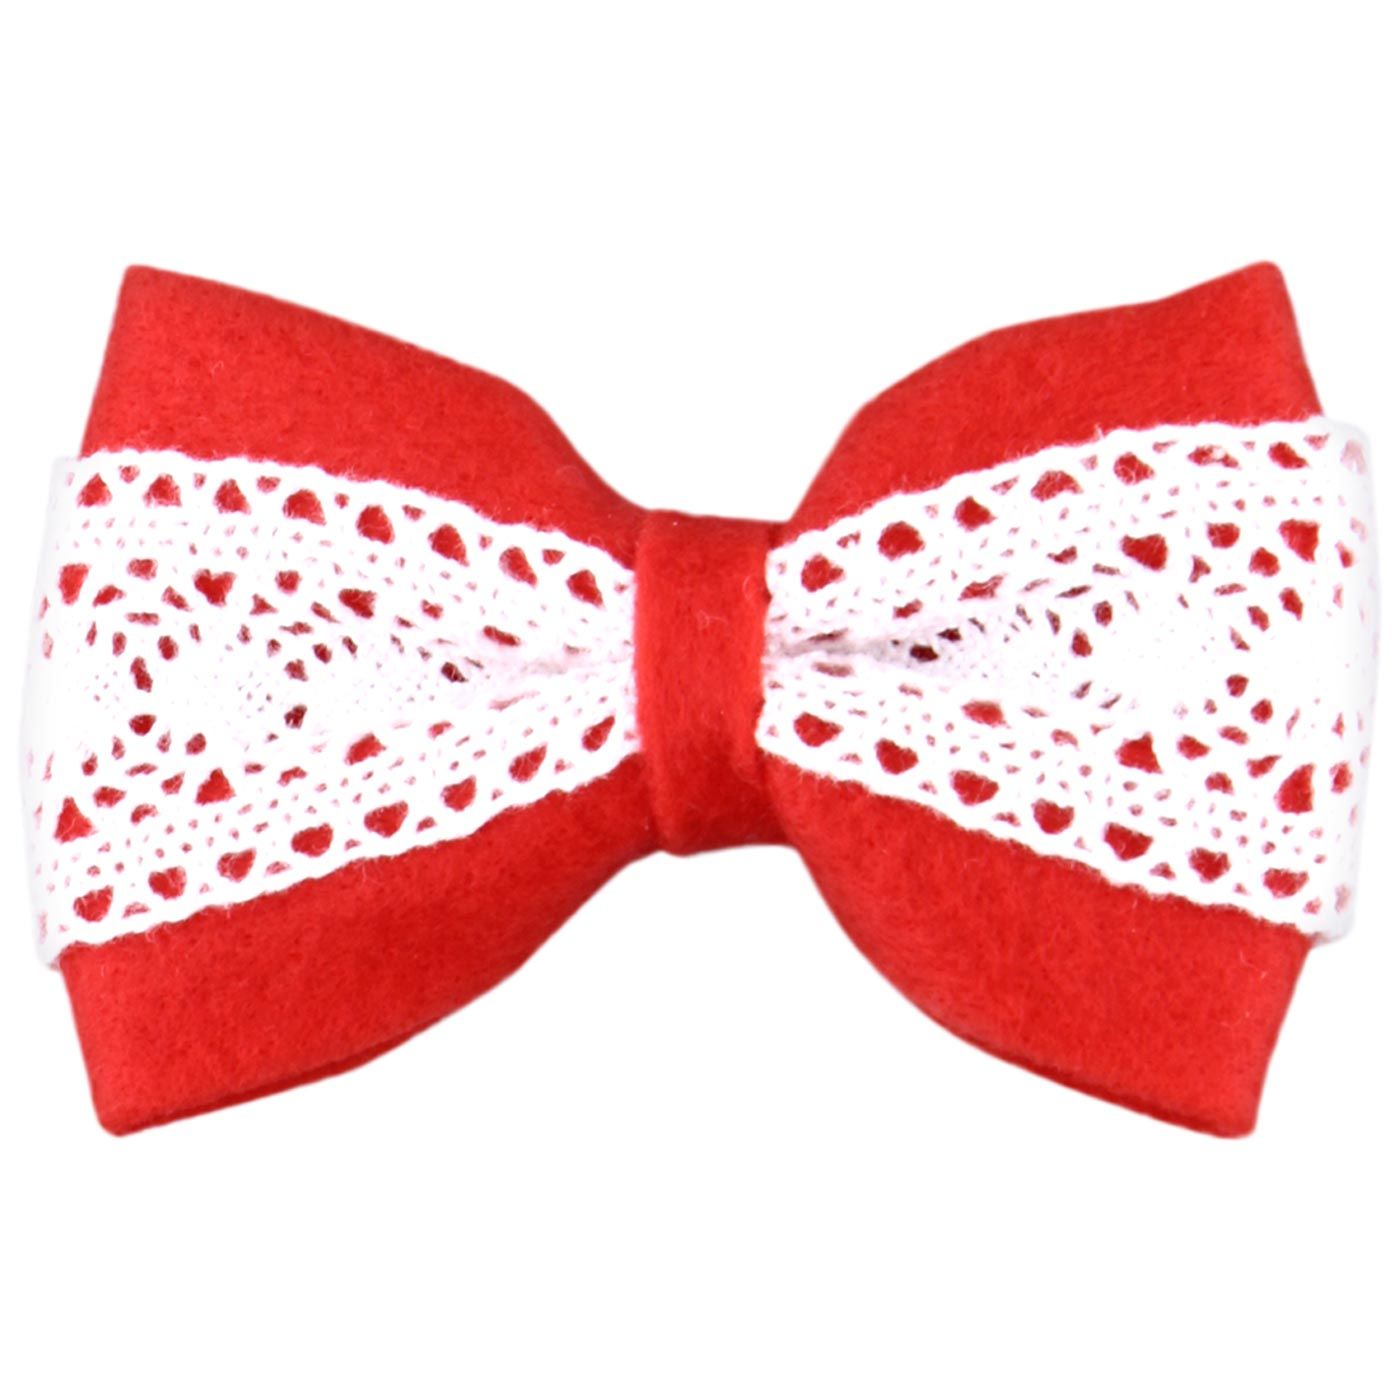 Bebecroc Double Layer Bow w/lace Red - 2